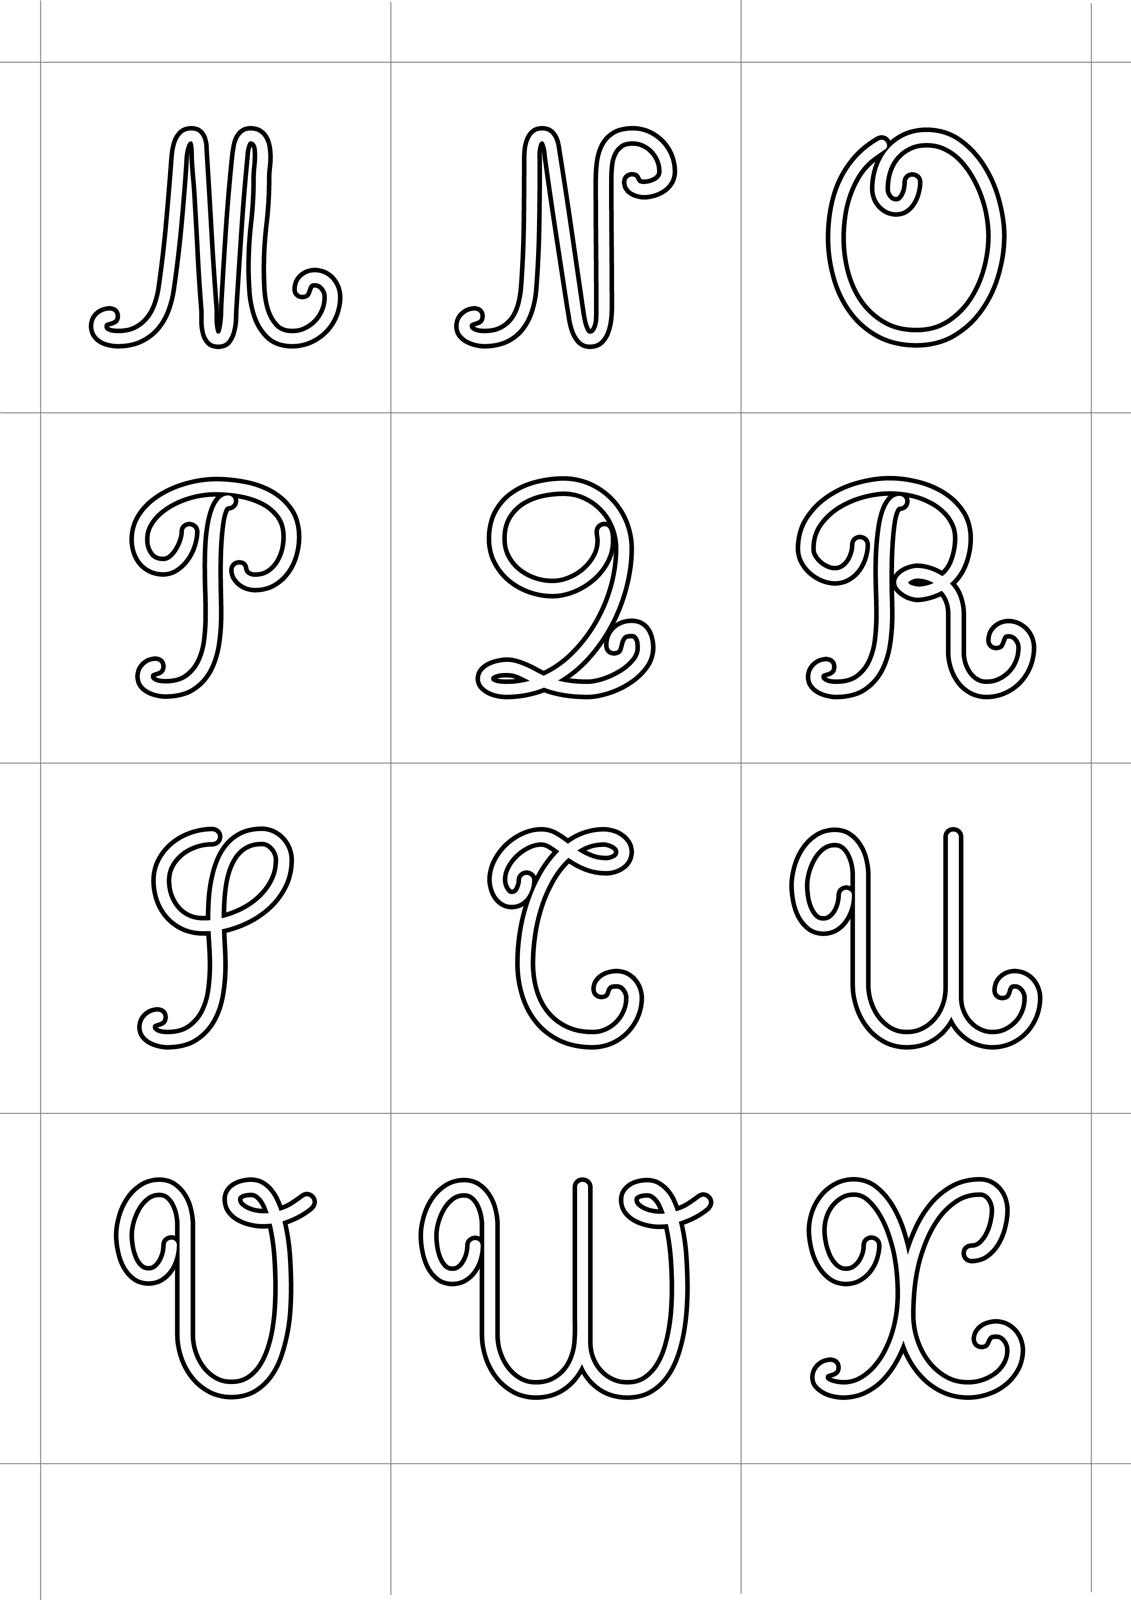 Letters and numbers - Italics uppercase letters from M to X